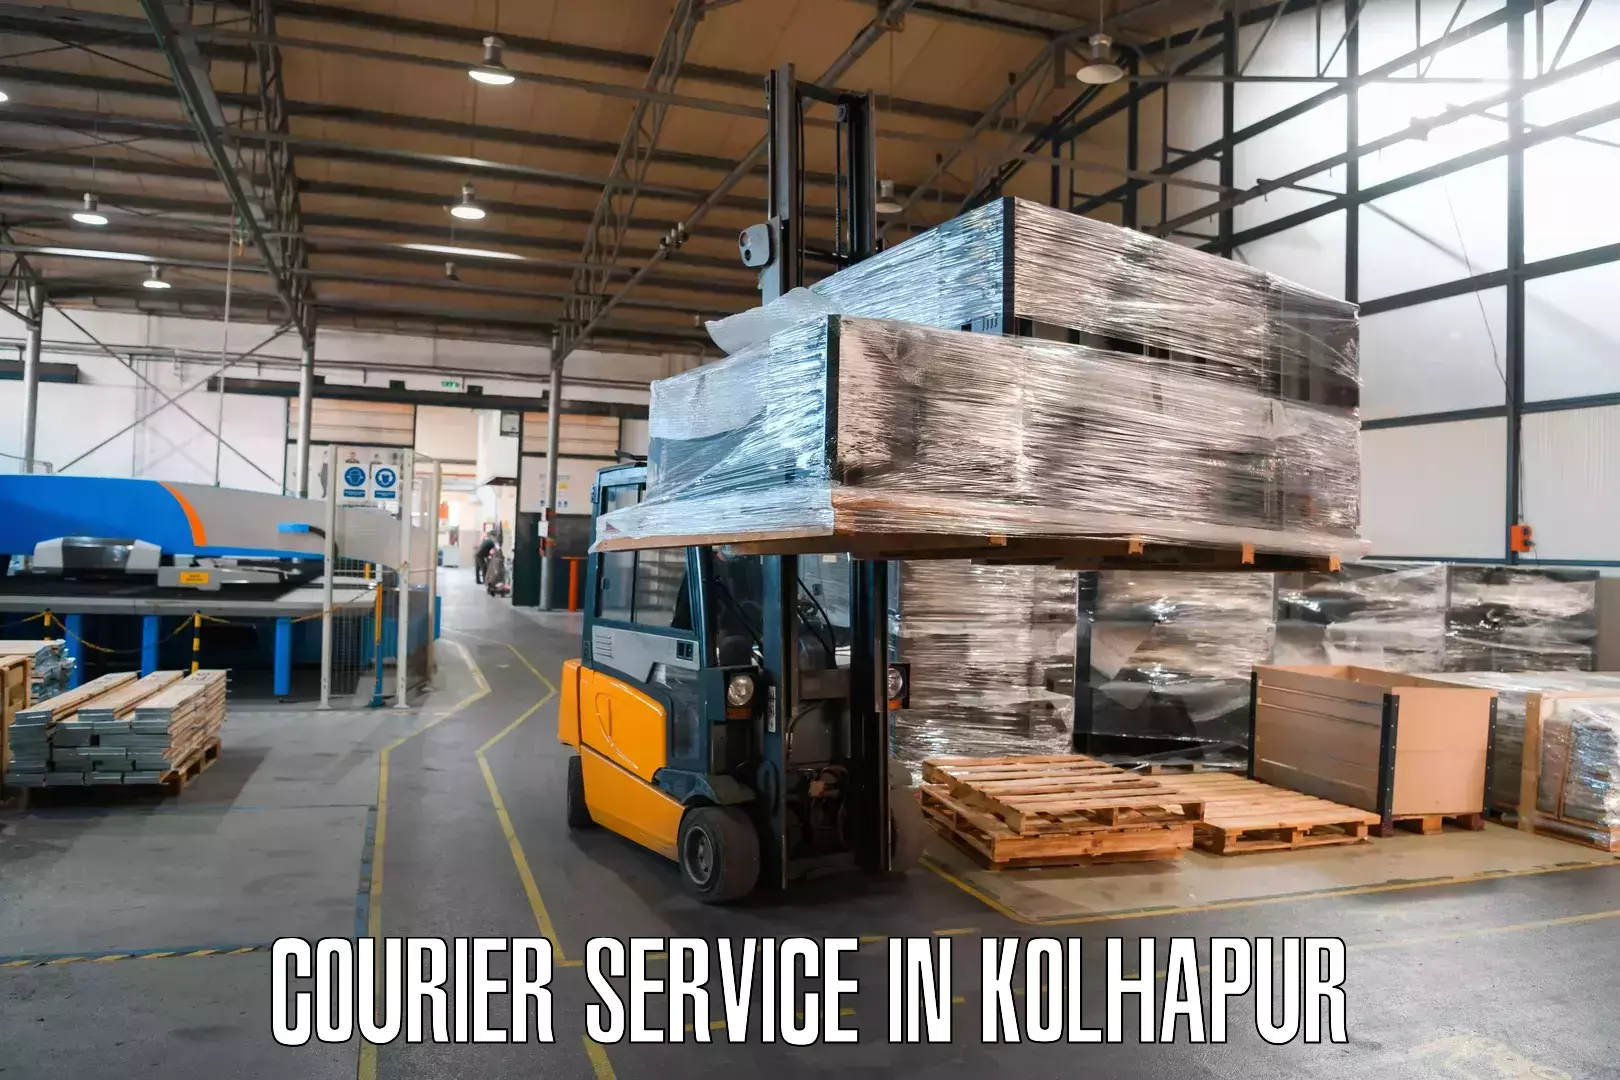 Reliable courier service in Kolhapur